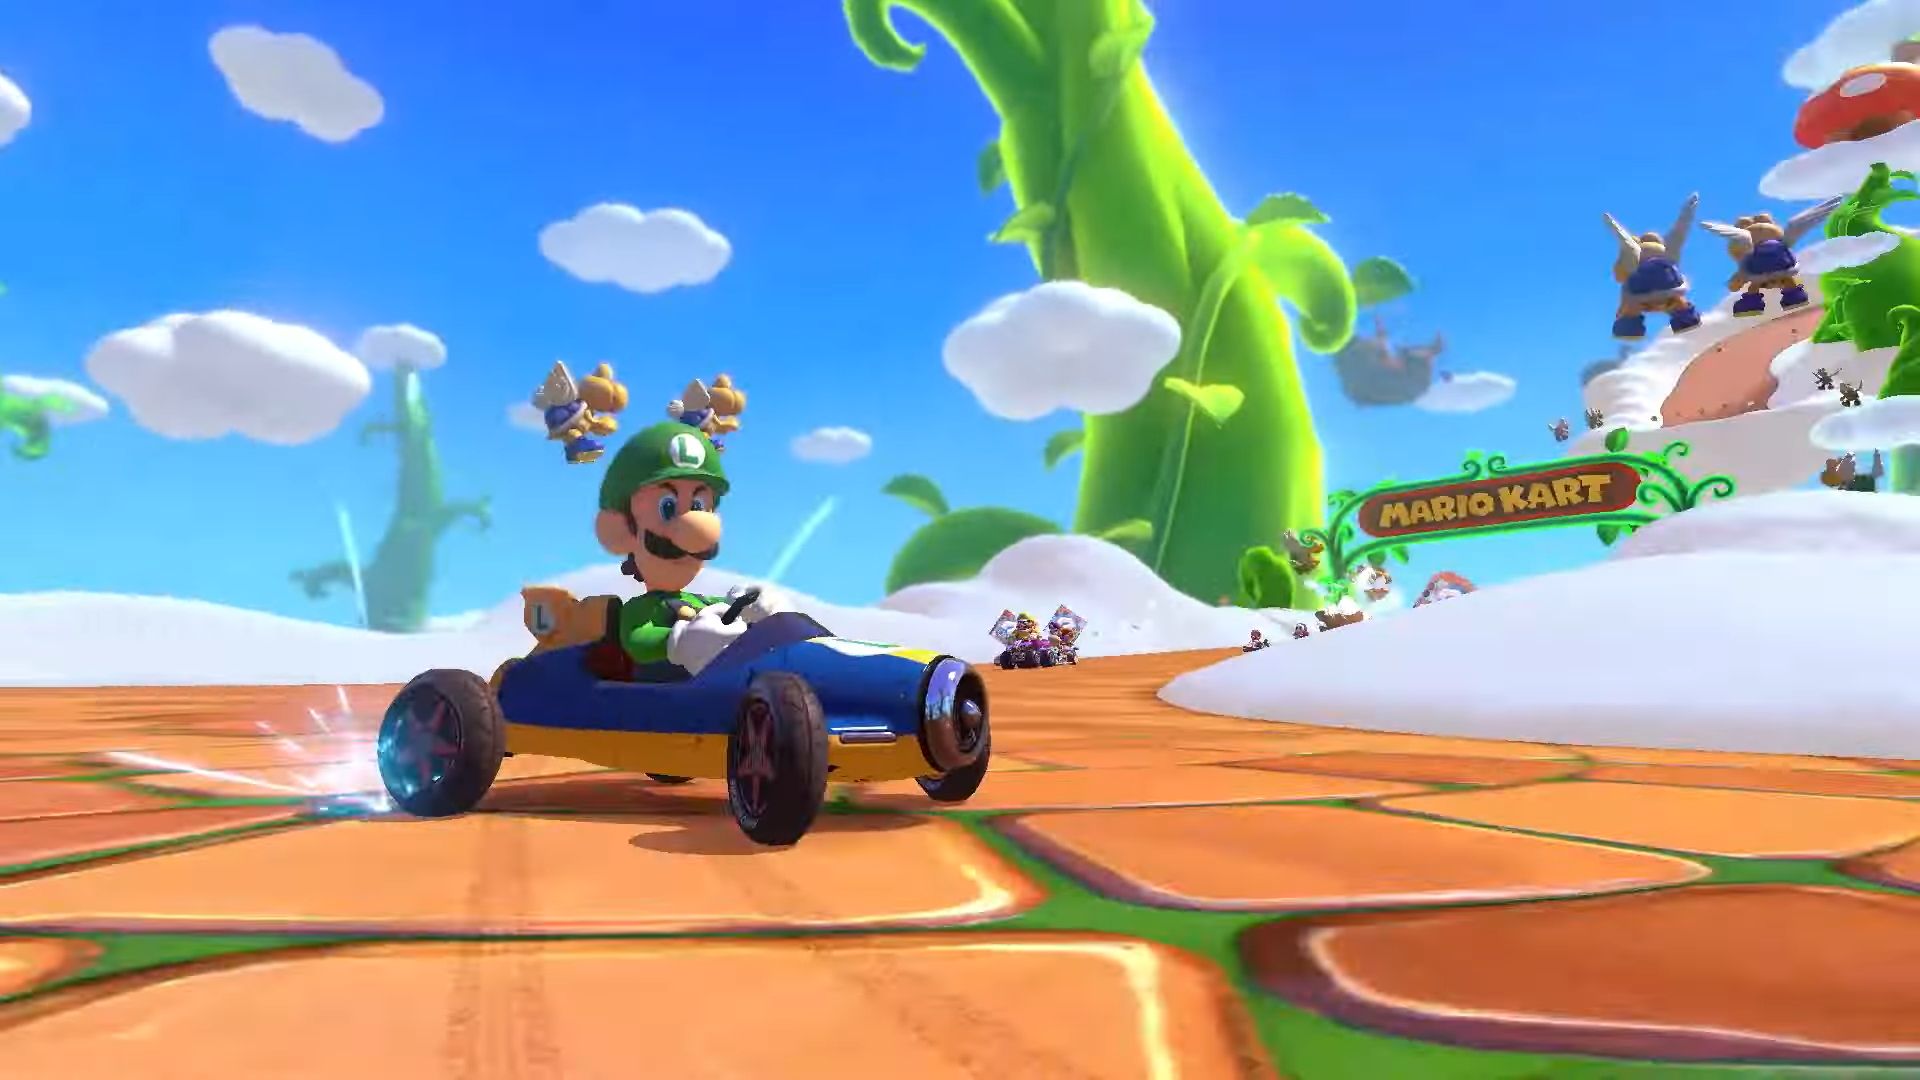 Mario Kart 8 Deluxe is set to double in size over the next two years